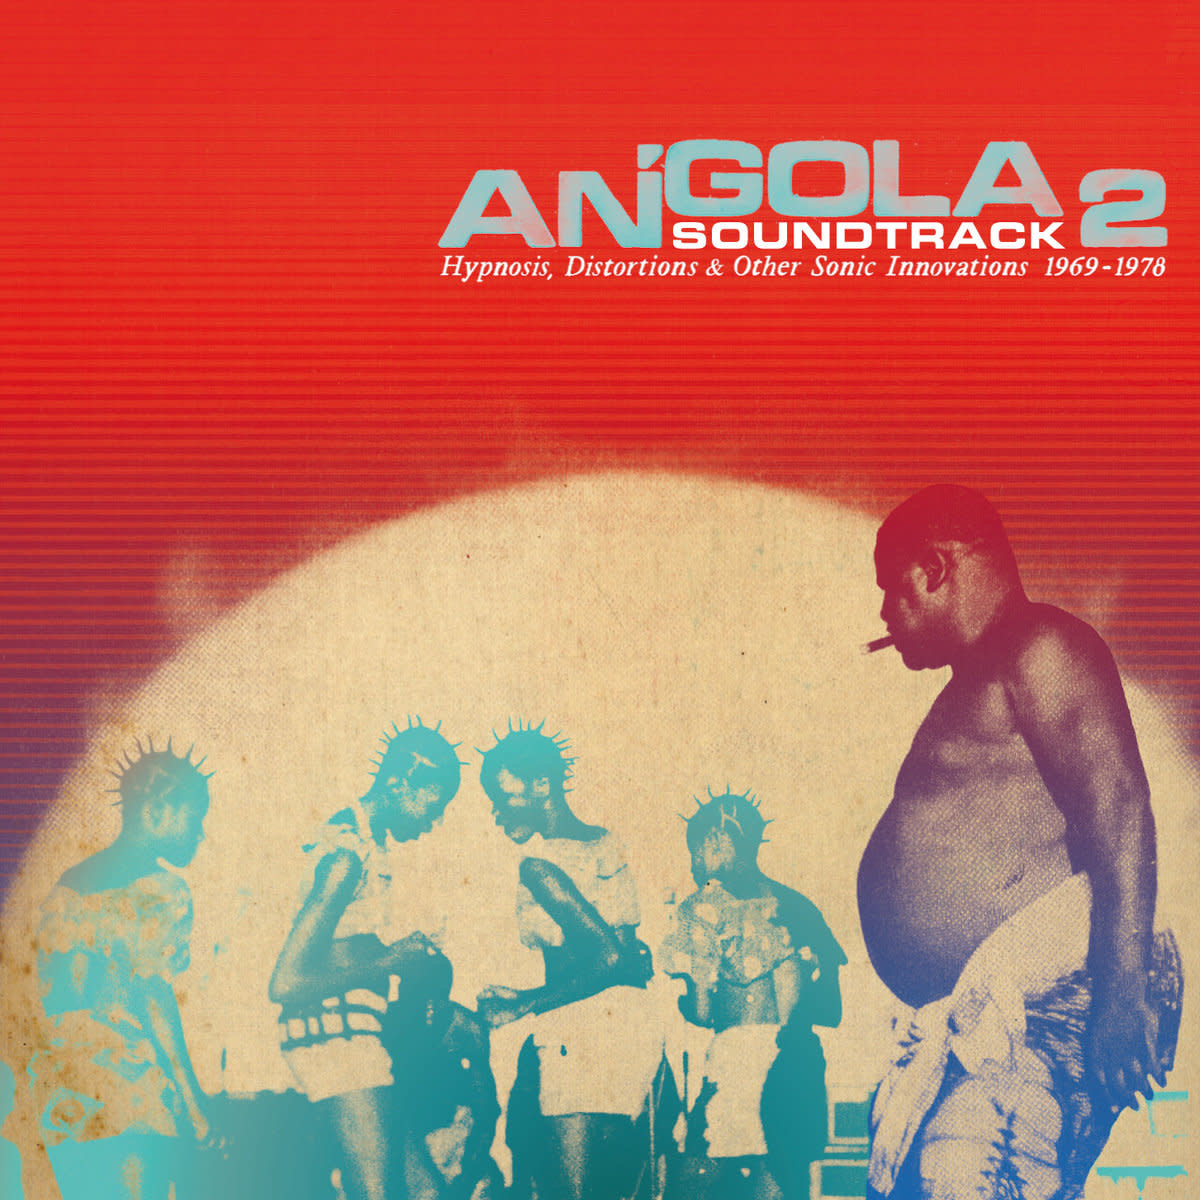 Analog Africa Various -  Angola Soundtrack 2: Hypnosis, Distorsions & Other Sonic Innovations 1969​-​1978